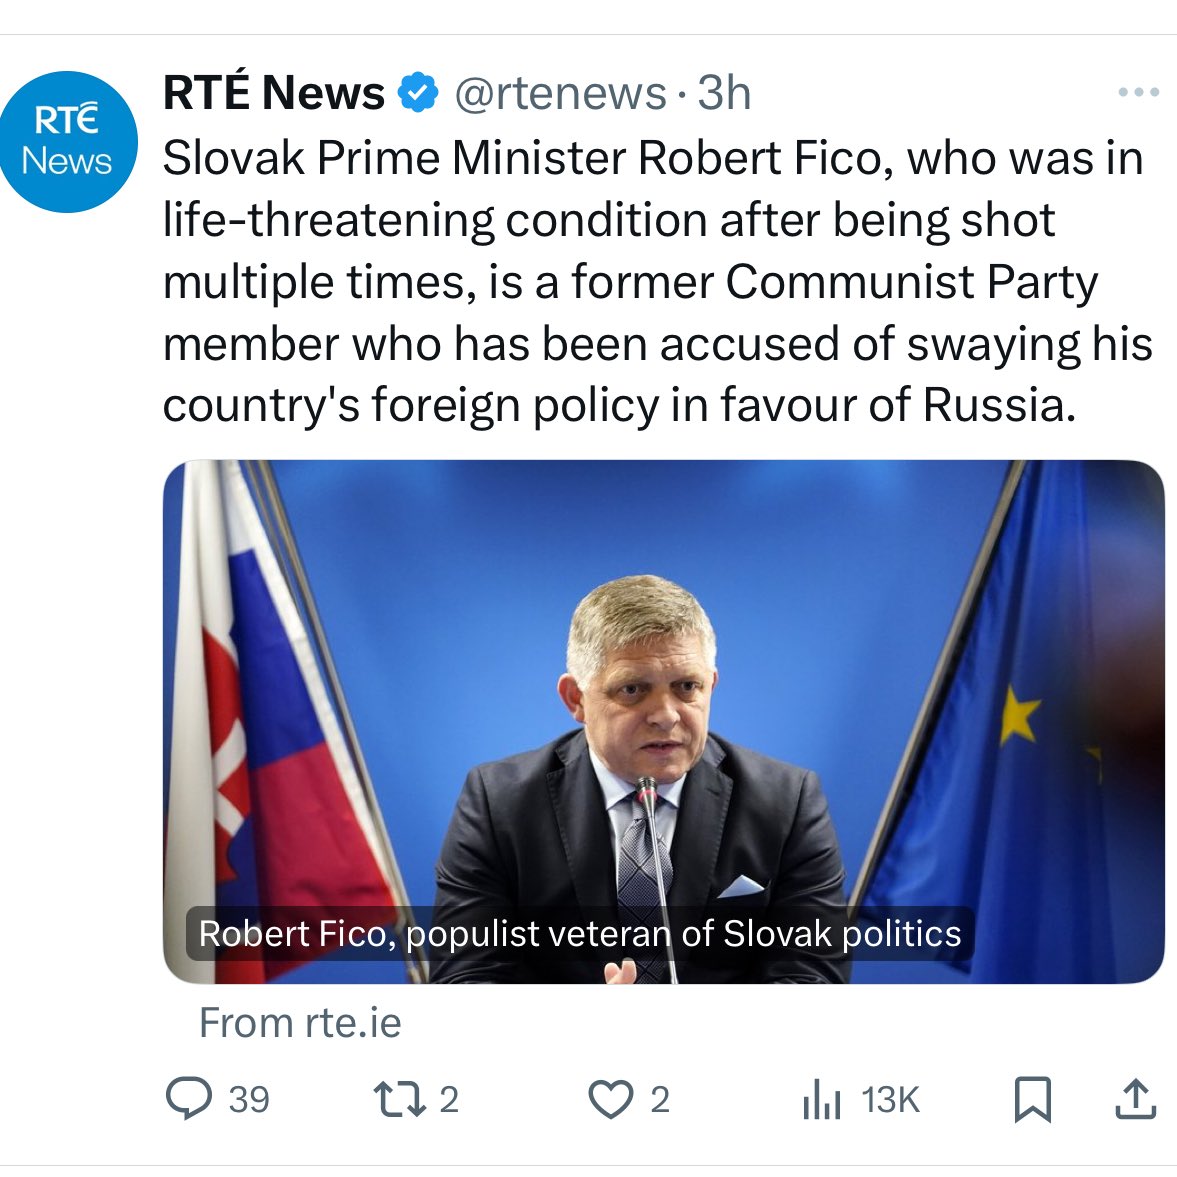 The subtext of RTE’s framing is disappointing: “Western political leader shot in attempted assassination had bad politics. We just thought you should know” - the prioritisation of this information is a form of particularly distasteful propaganda. RTE should do better.